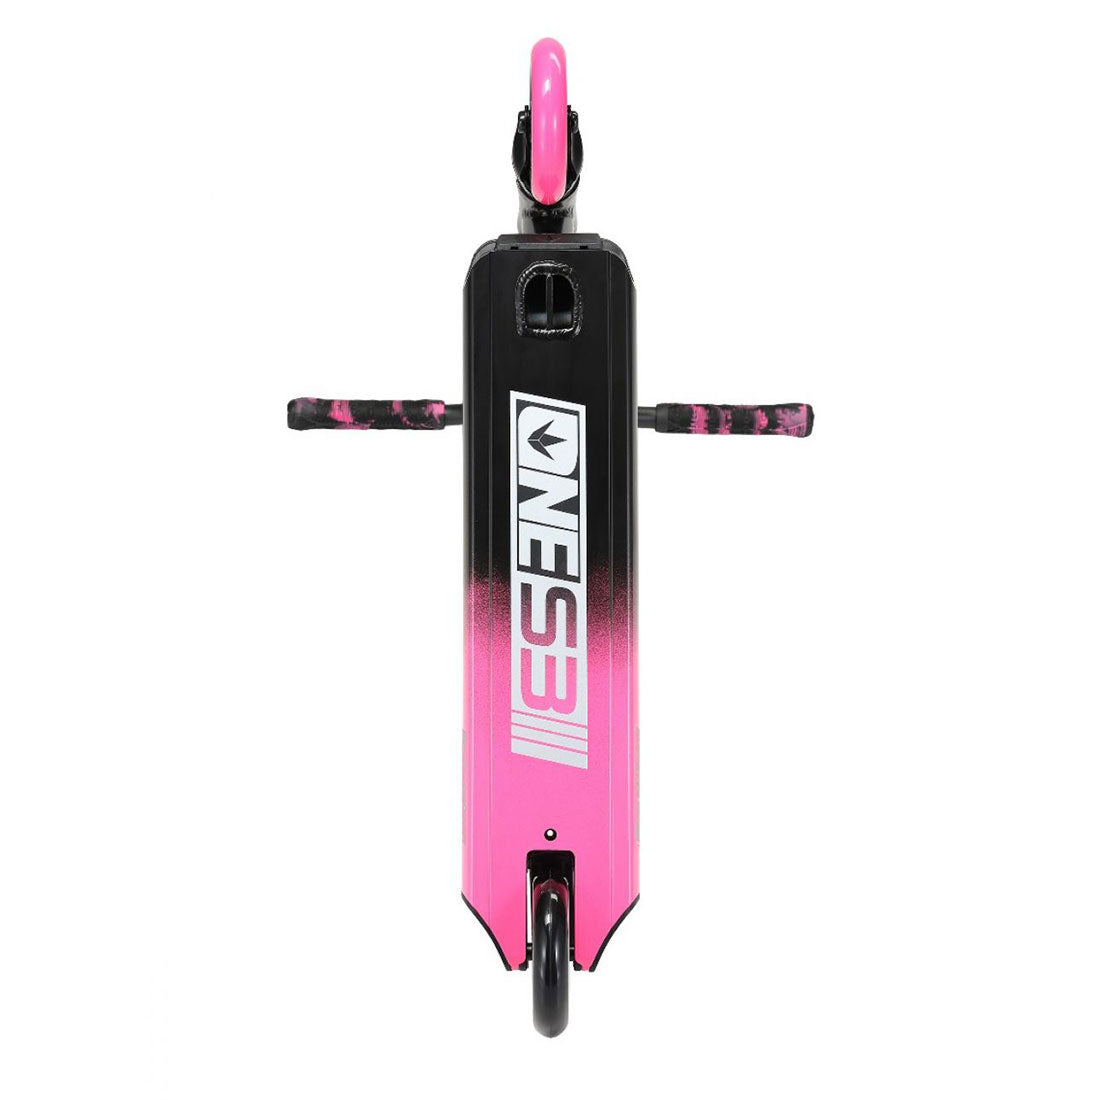 Envy ONE S3 Complete - Black/Pink Scooter Completes Trick